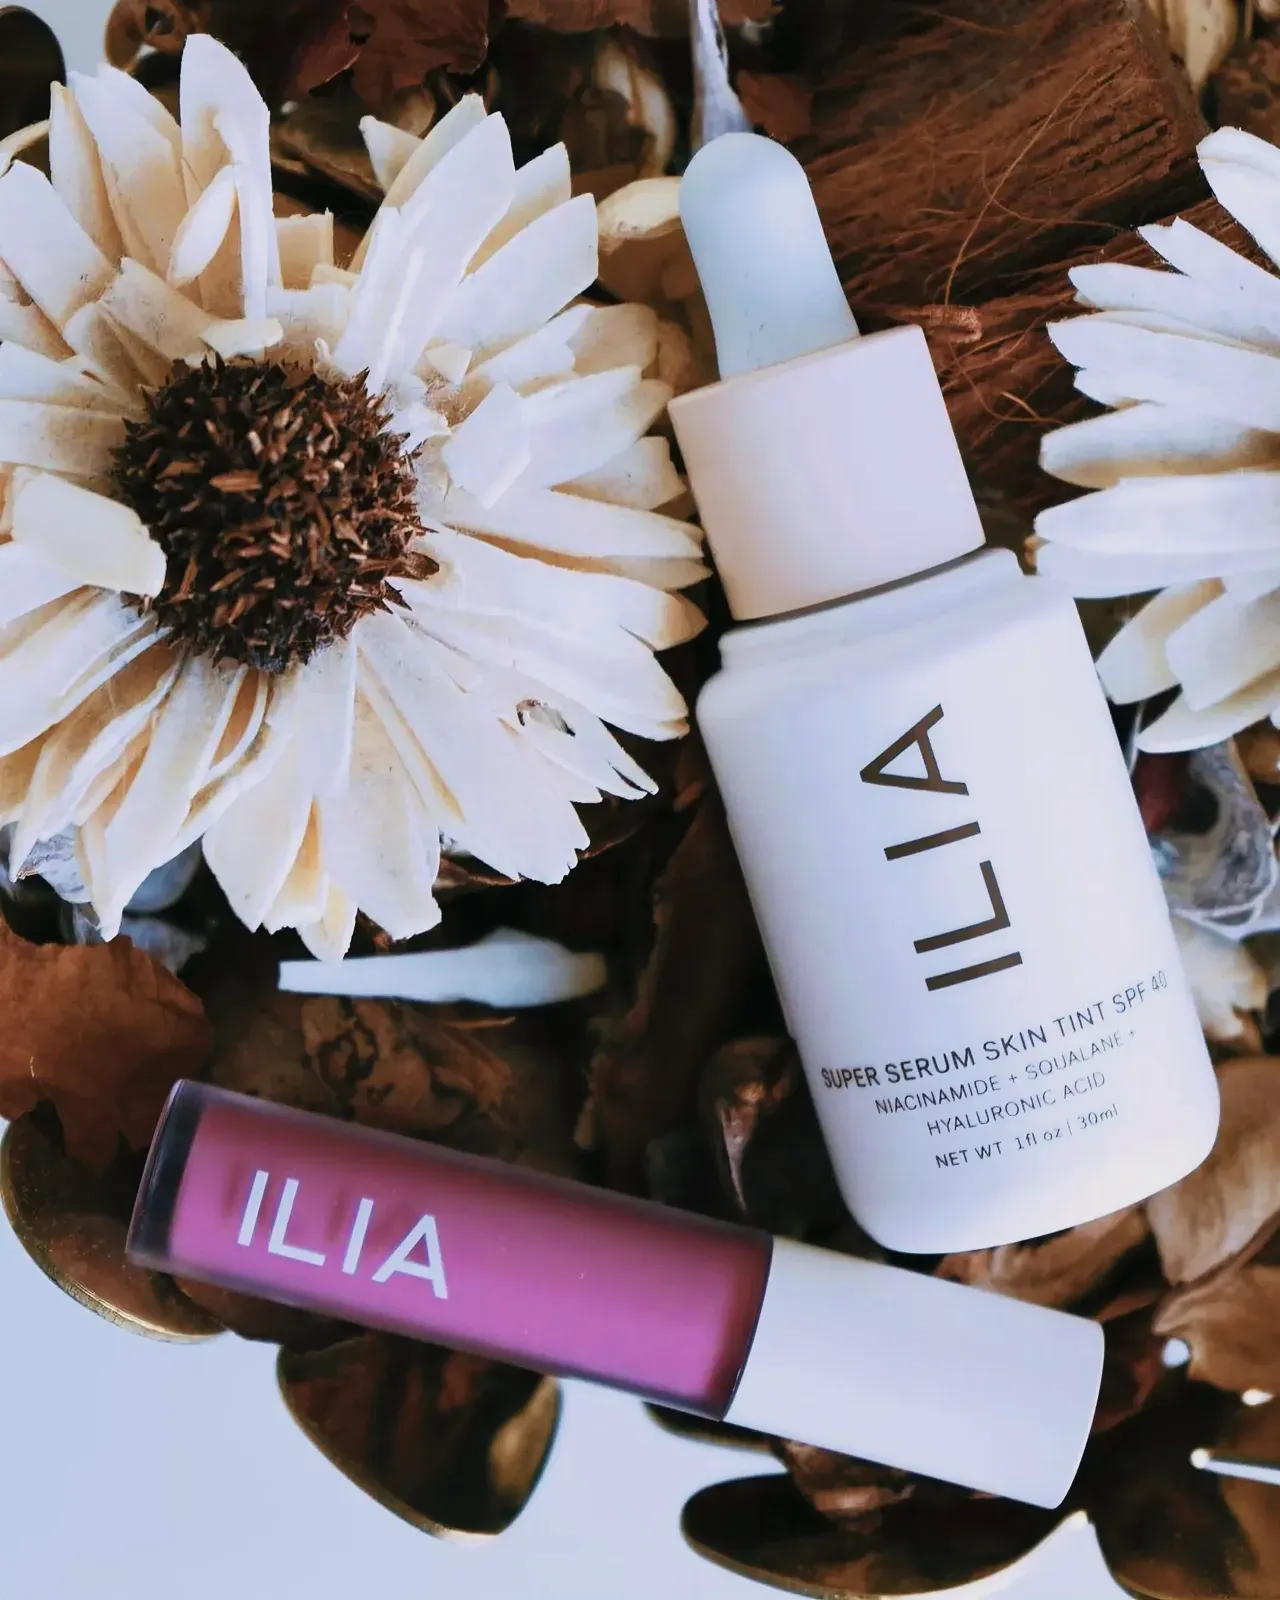 ILIA Super Serum Skin Tint SPF 40 bottle surrounded by sunflowers